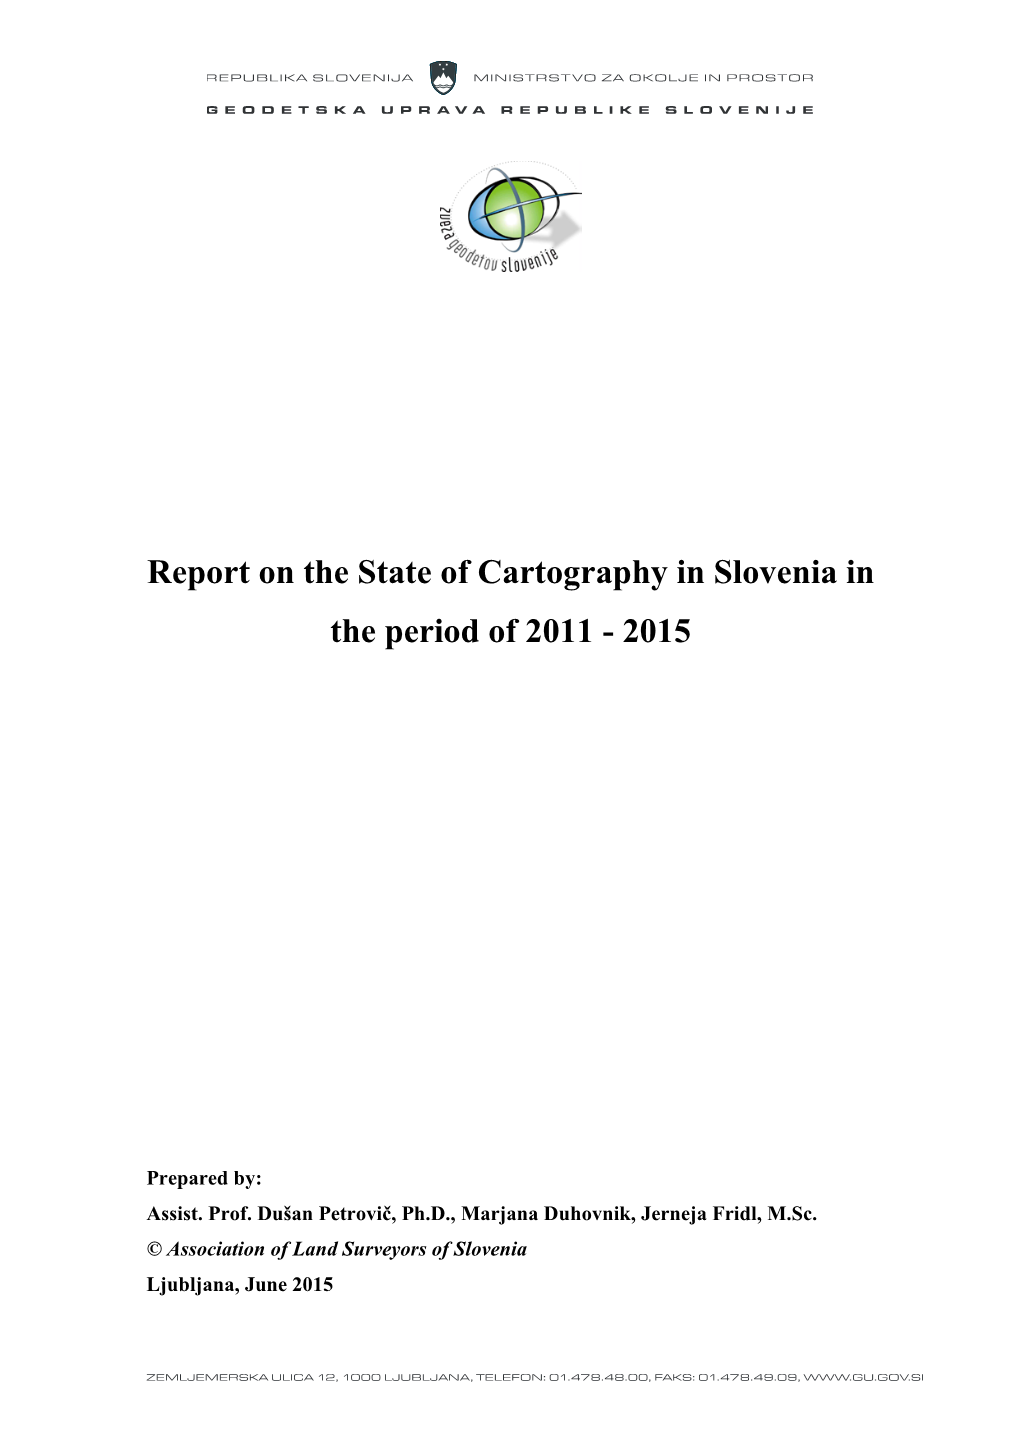 Report on the State of Cartography in Slovenia in the Period of 2011 - 2015